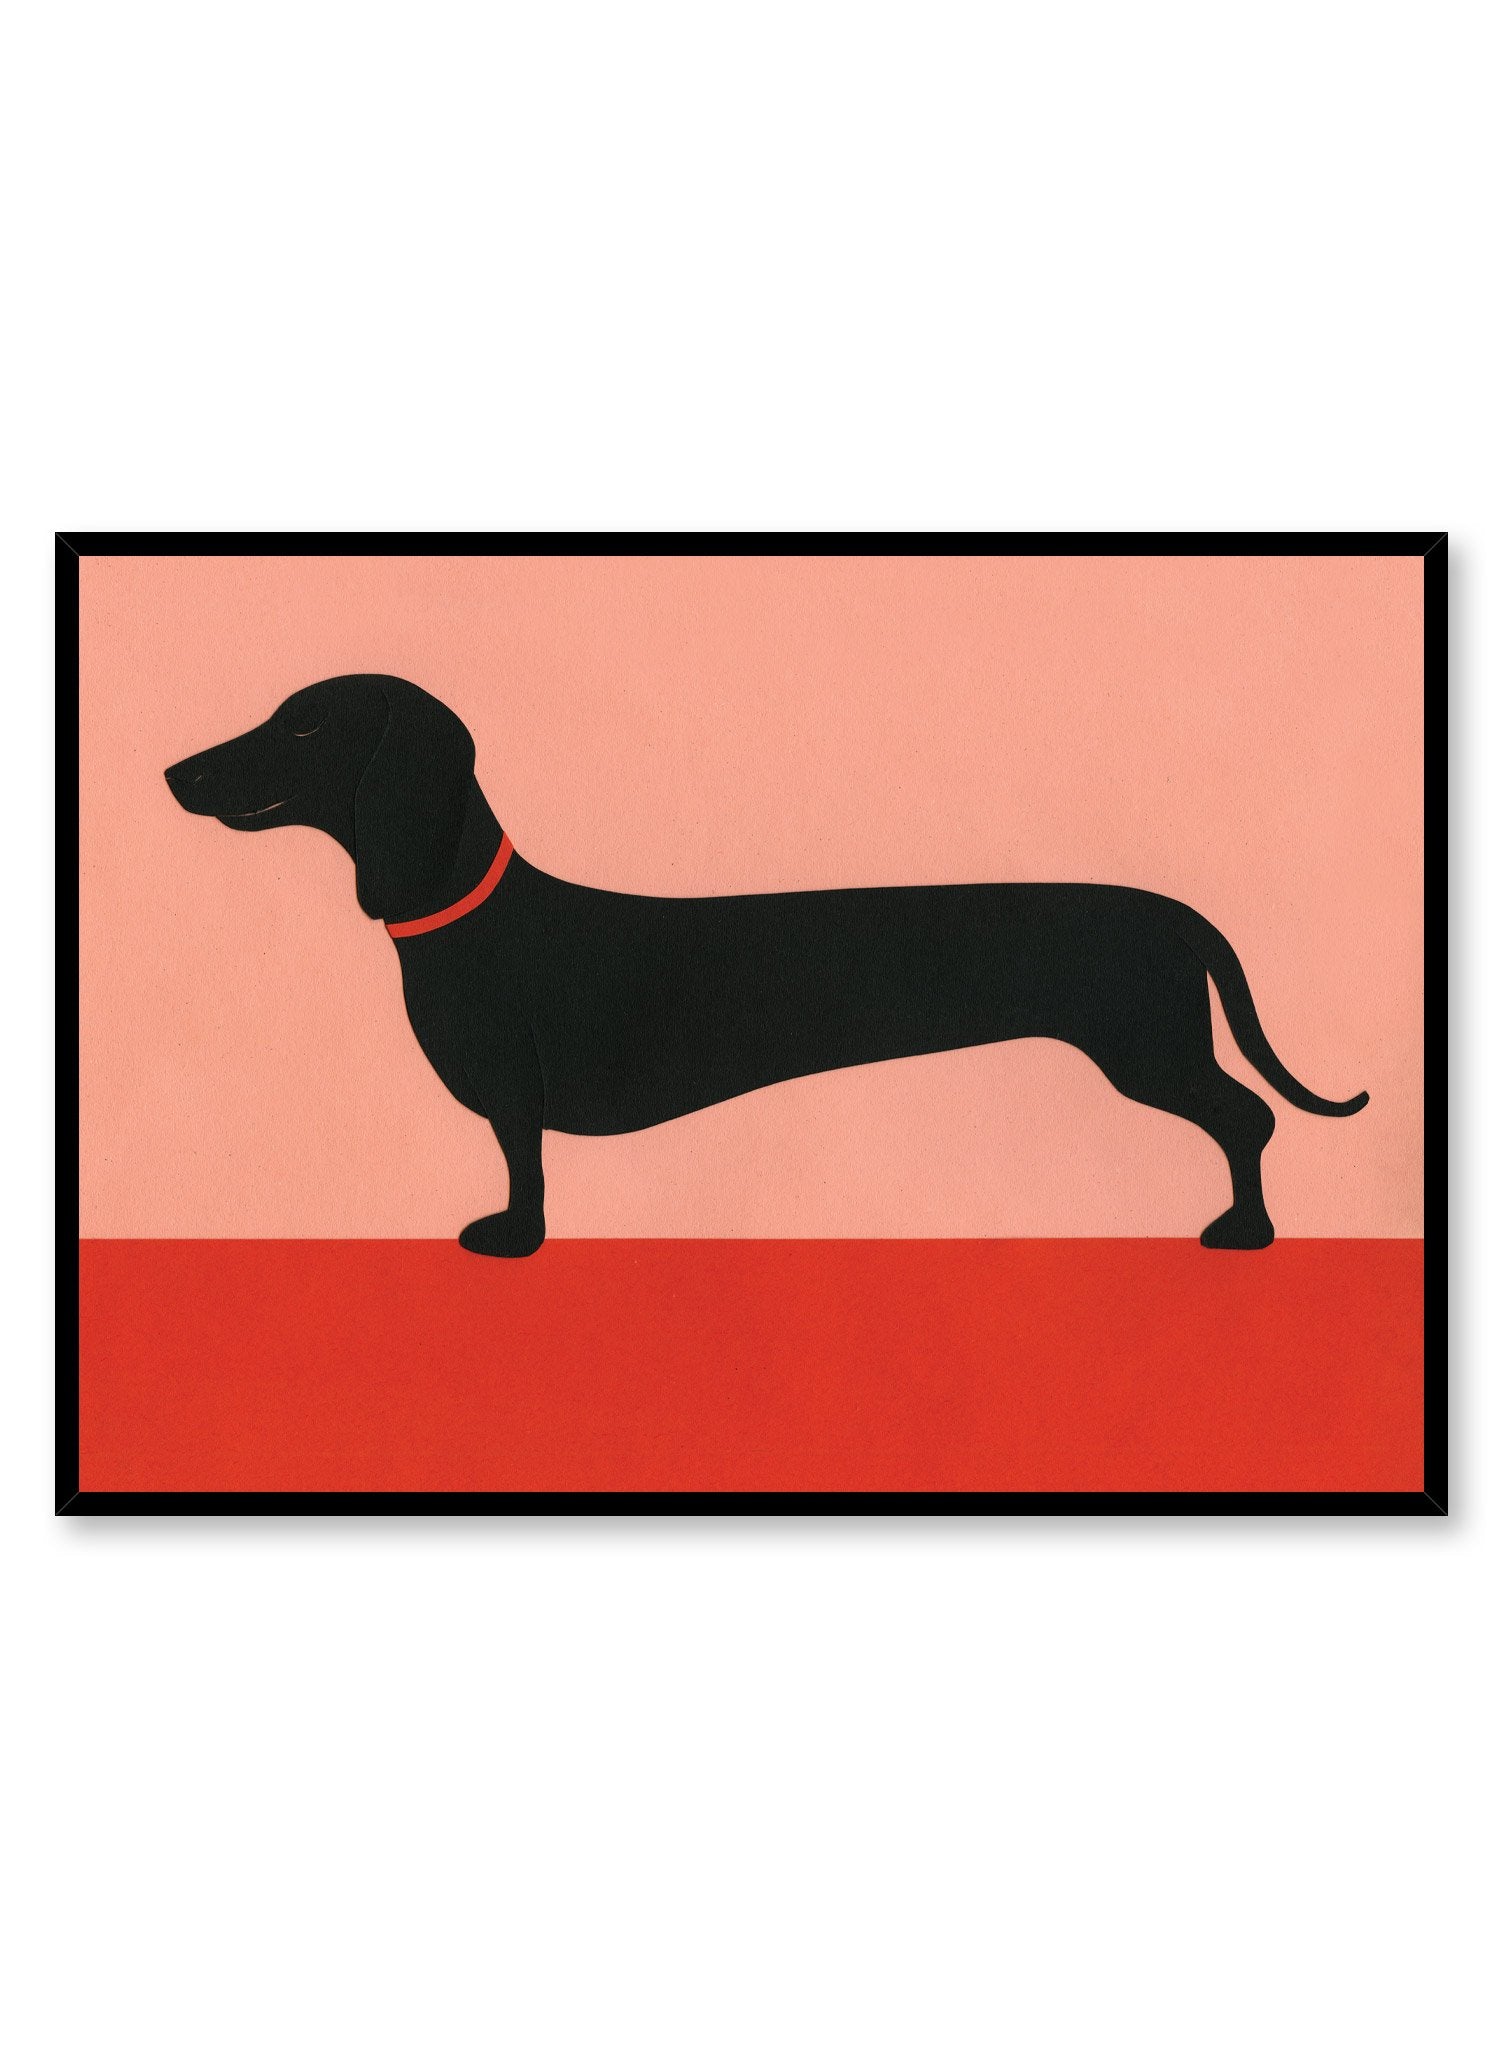 Modern minimalist poster by Opposite Wall with abstract collage illustration of dachshund weiner dog